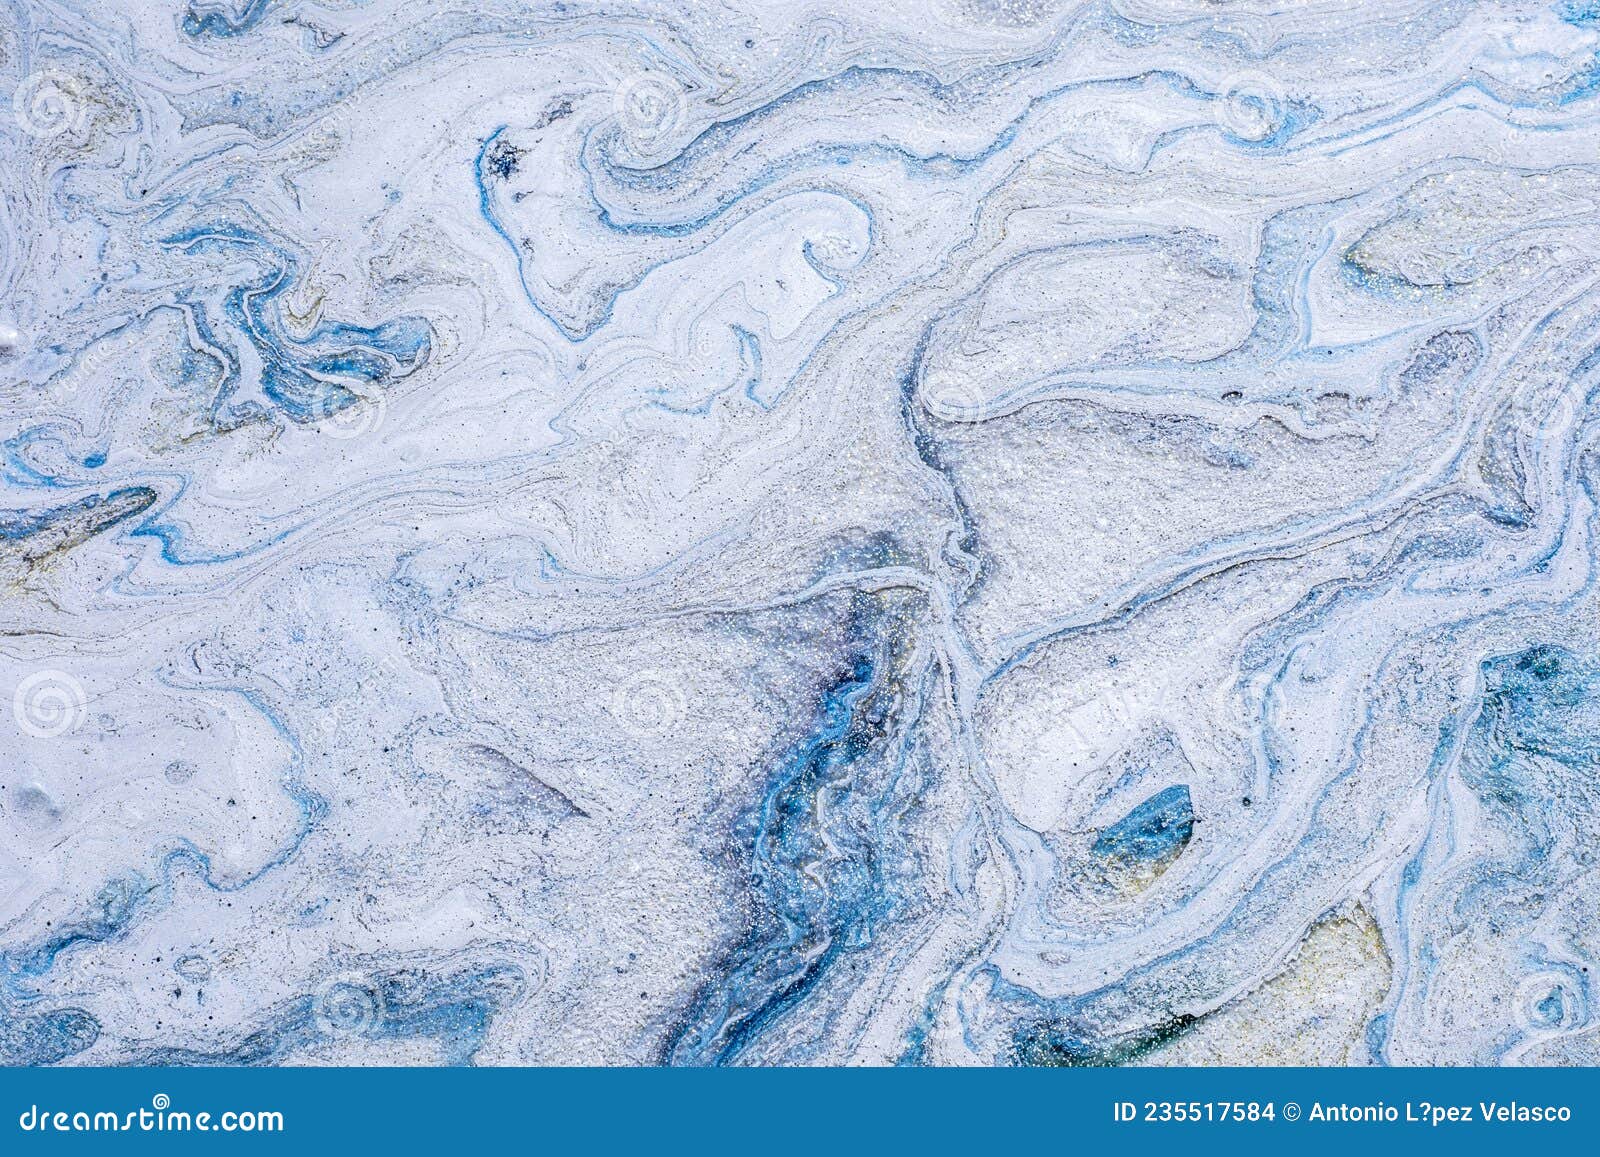 texture of white and blue shiny marble